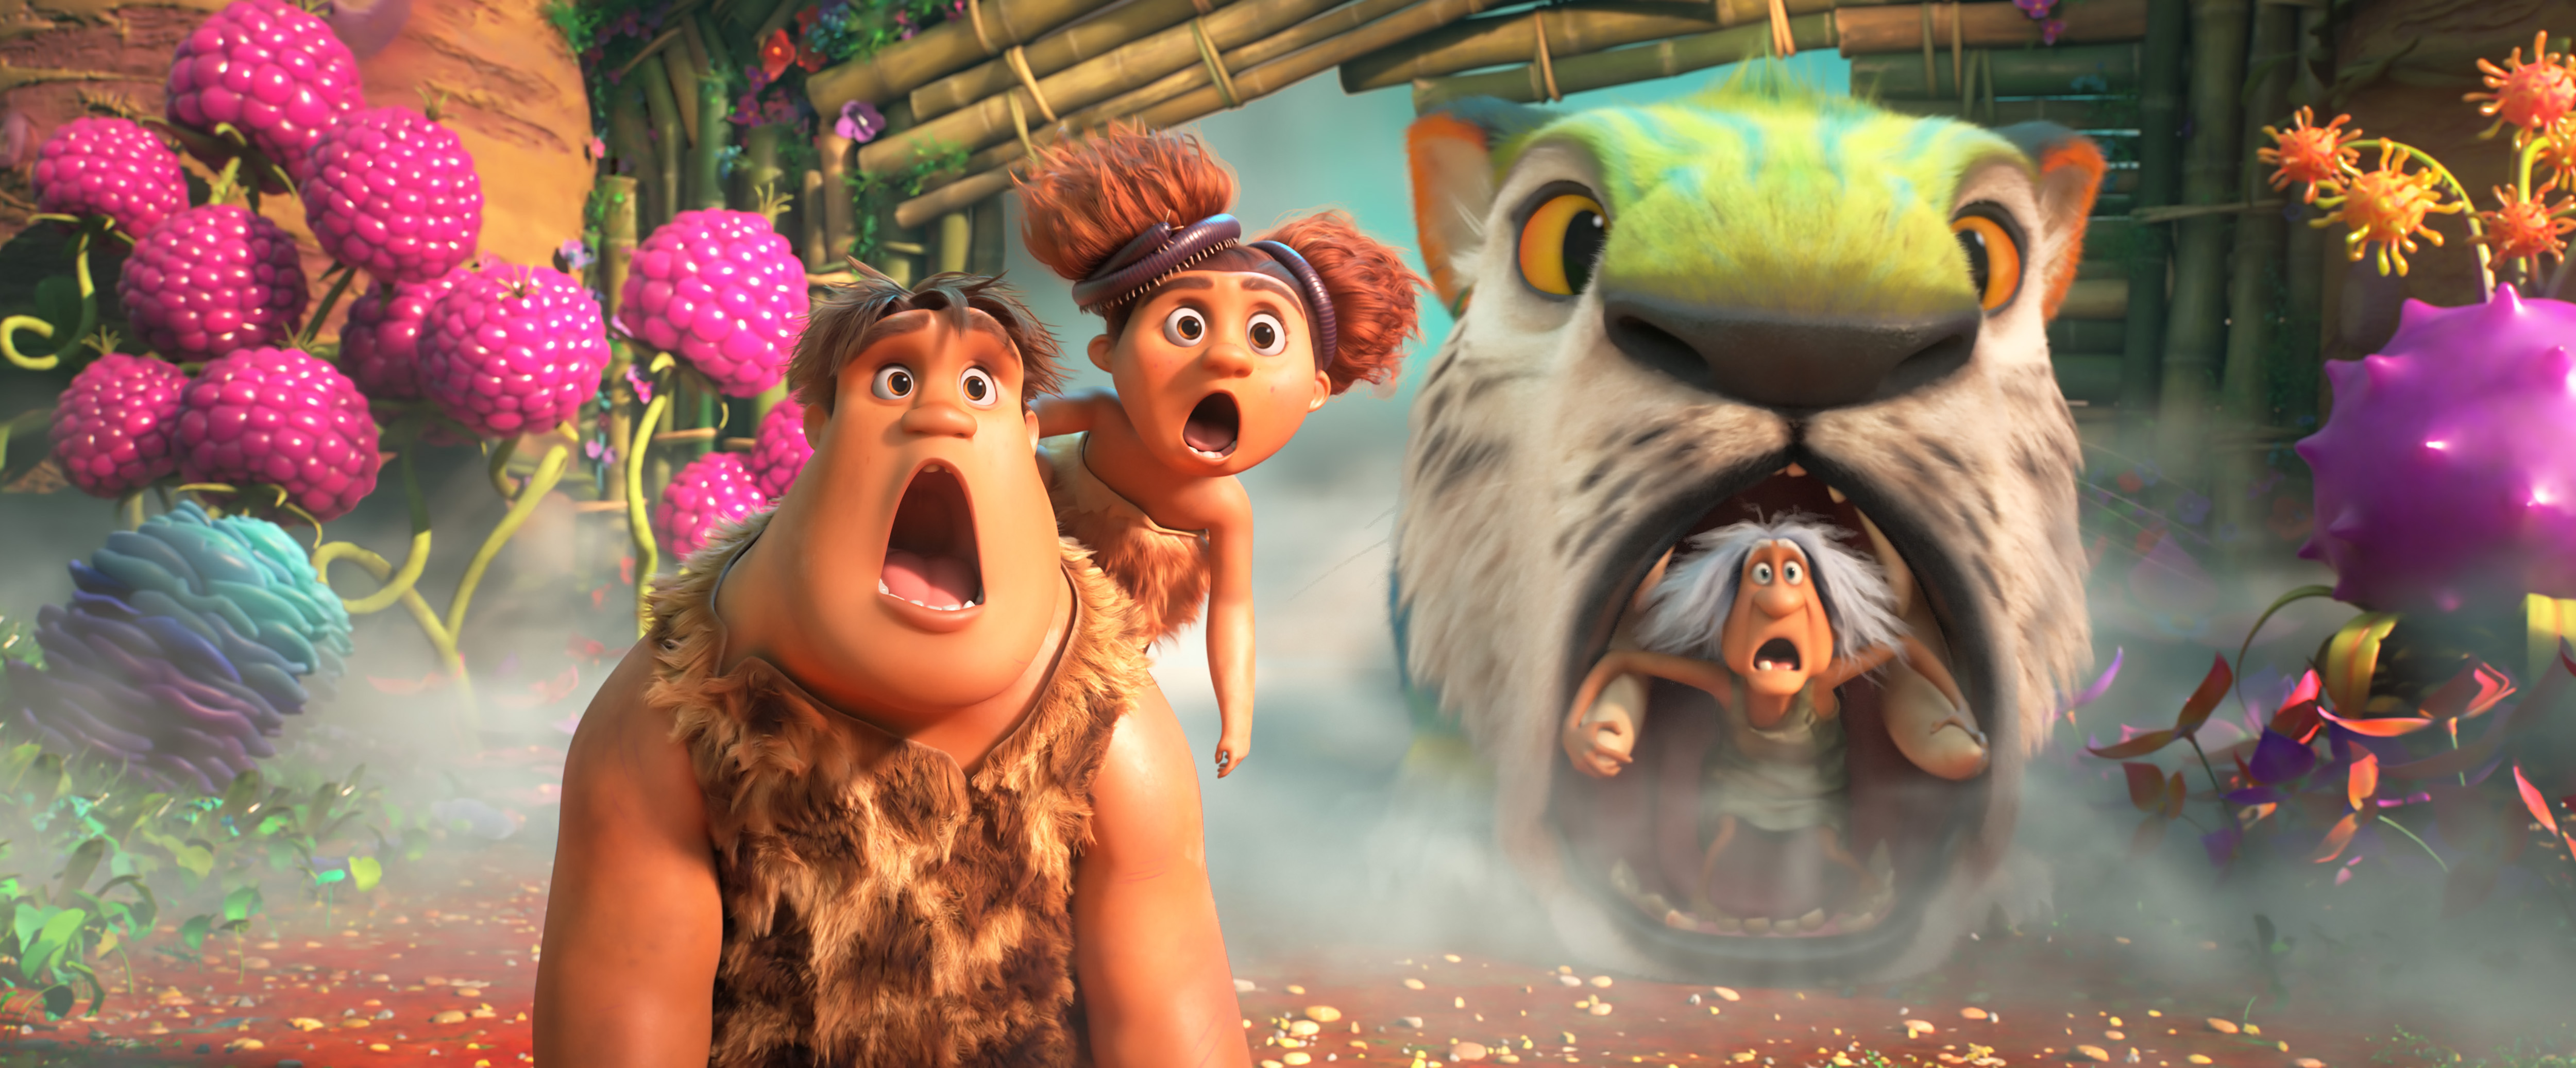 THE CROODS A NEW AGE Fandango Gift Code Giveaway